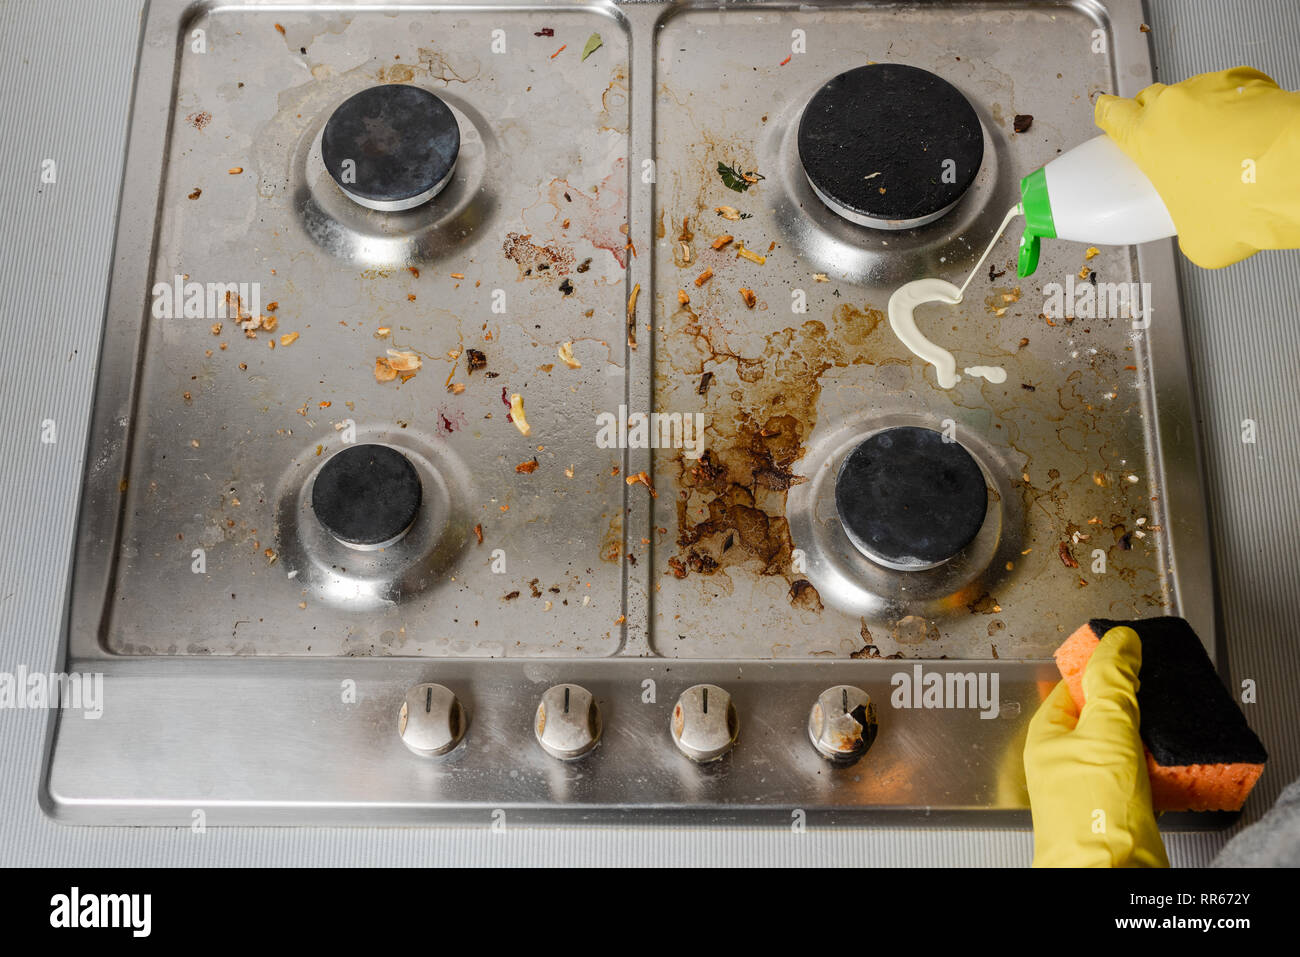 Application of detergent on surface of a dirty gas stove. view from above. Stock Photo